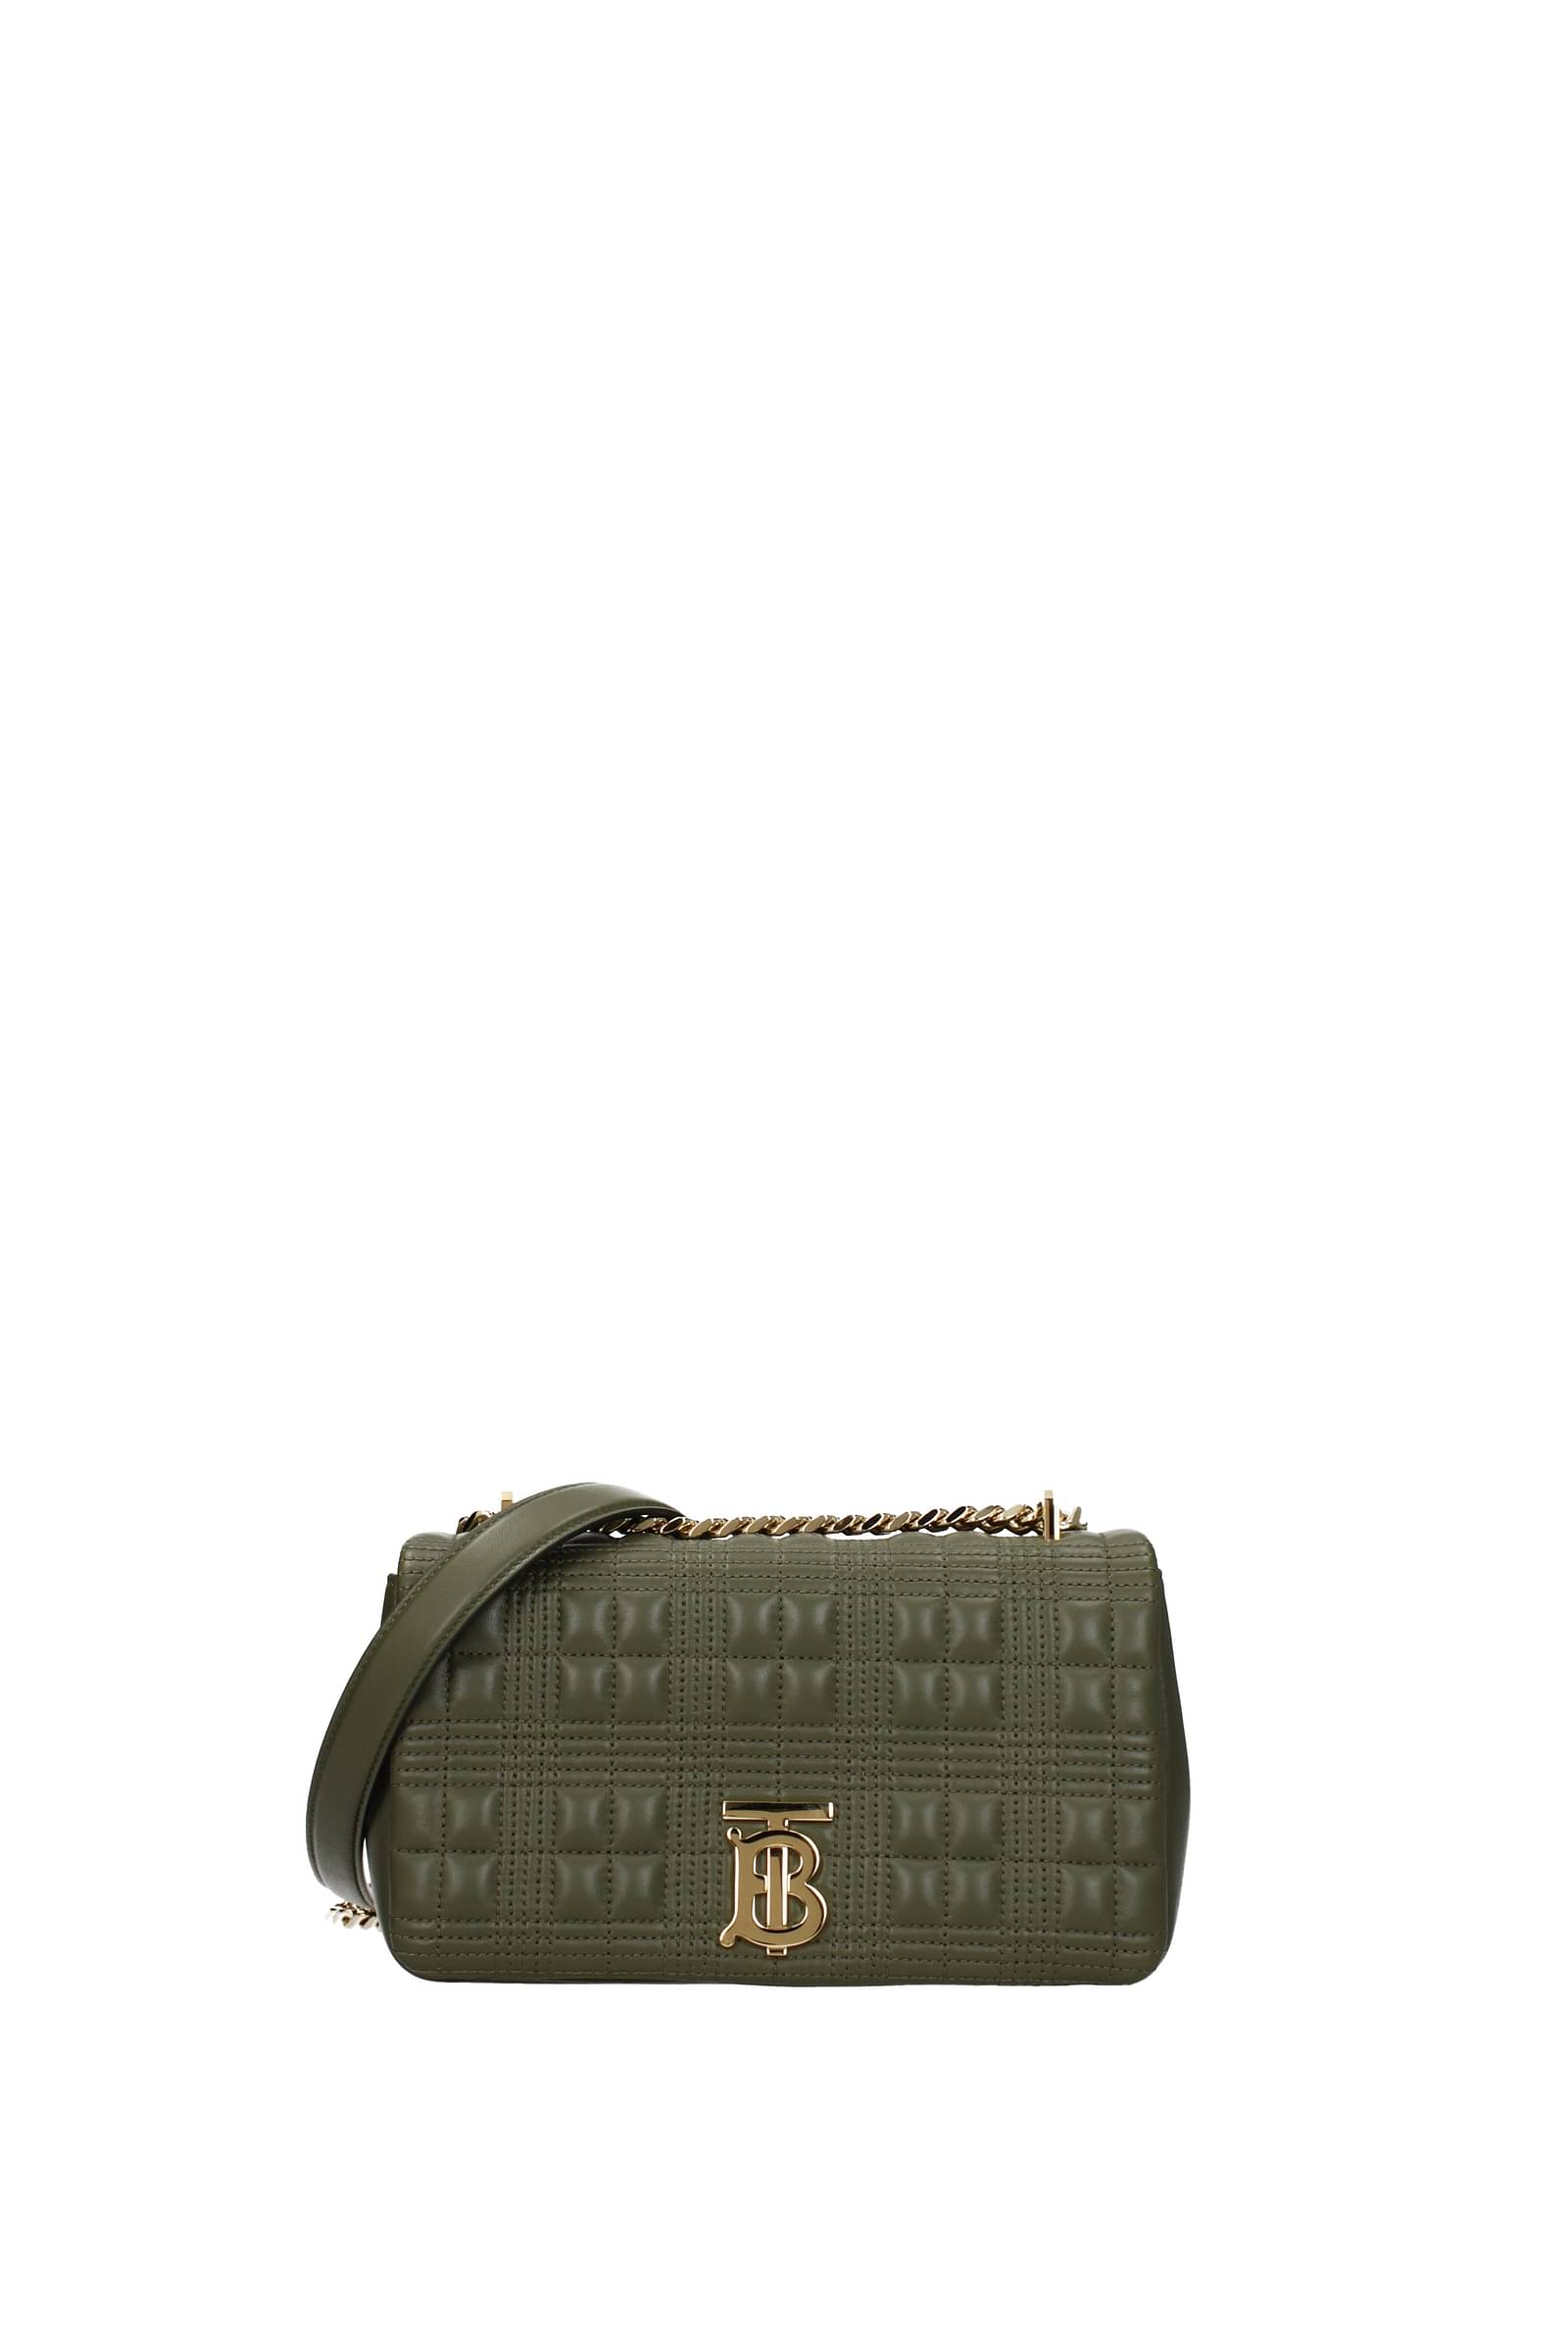 4 Best Burberry Bags To Invest In Daniel Lee Burberry Bags